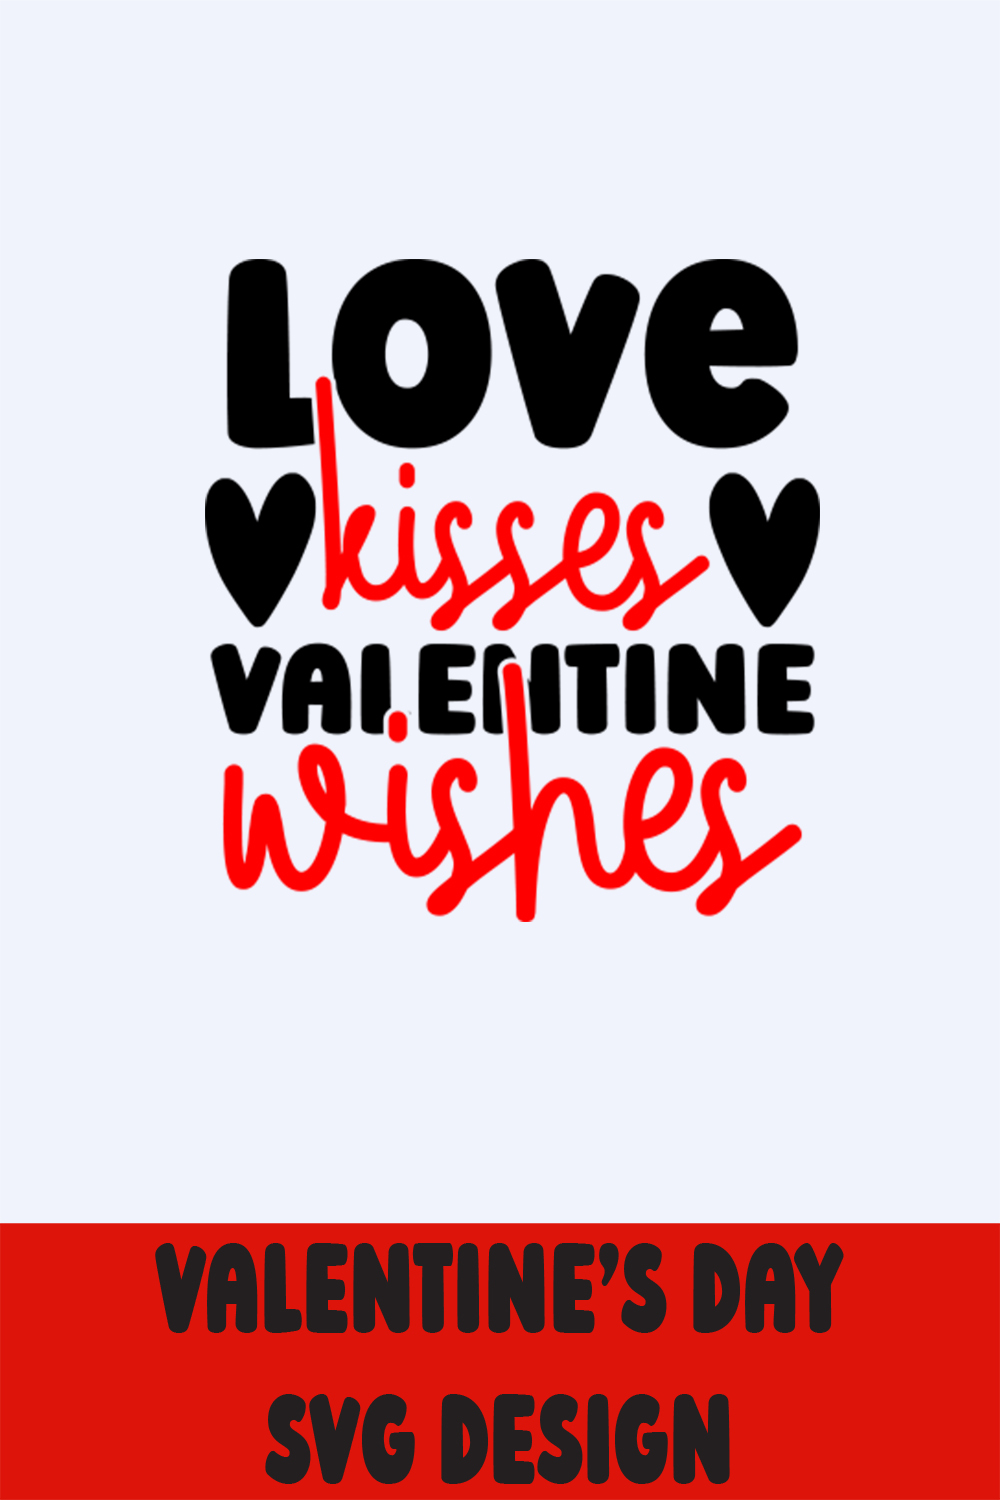 Image with colorful inscription Love Kisses Valentine Wishes